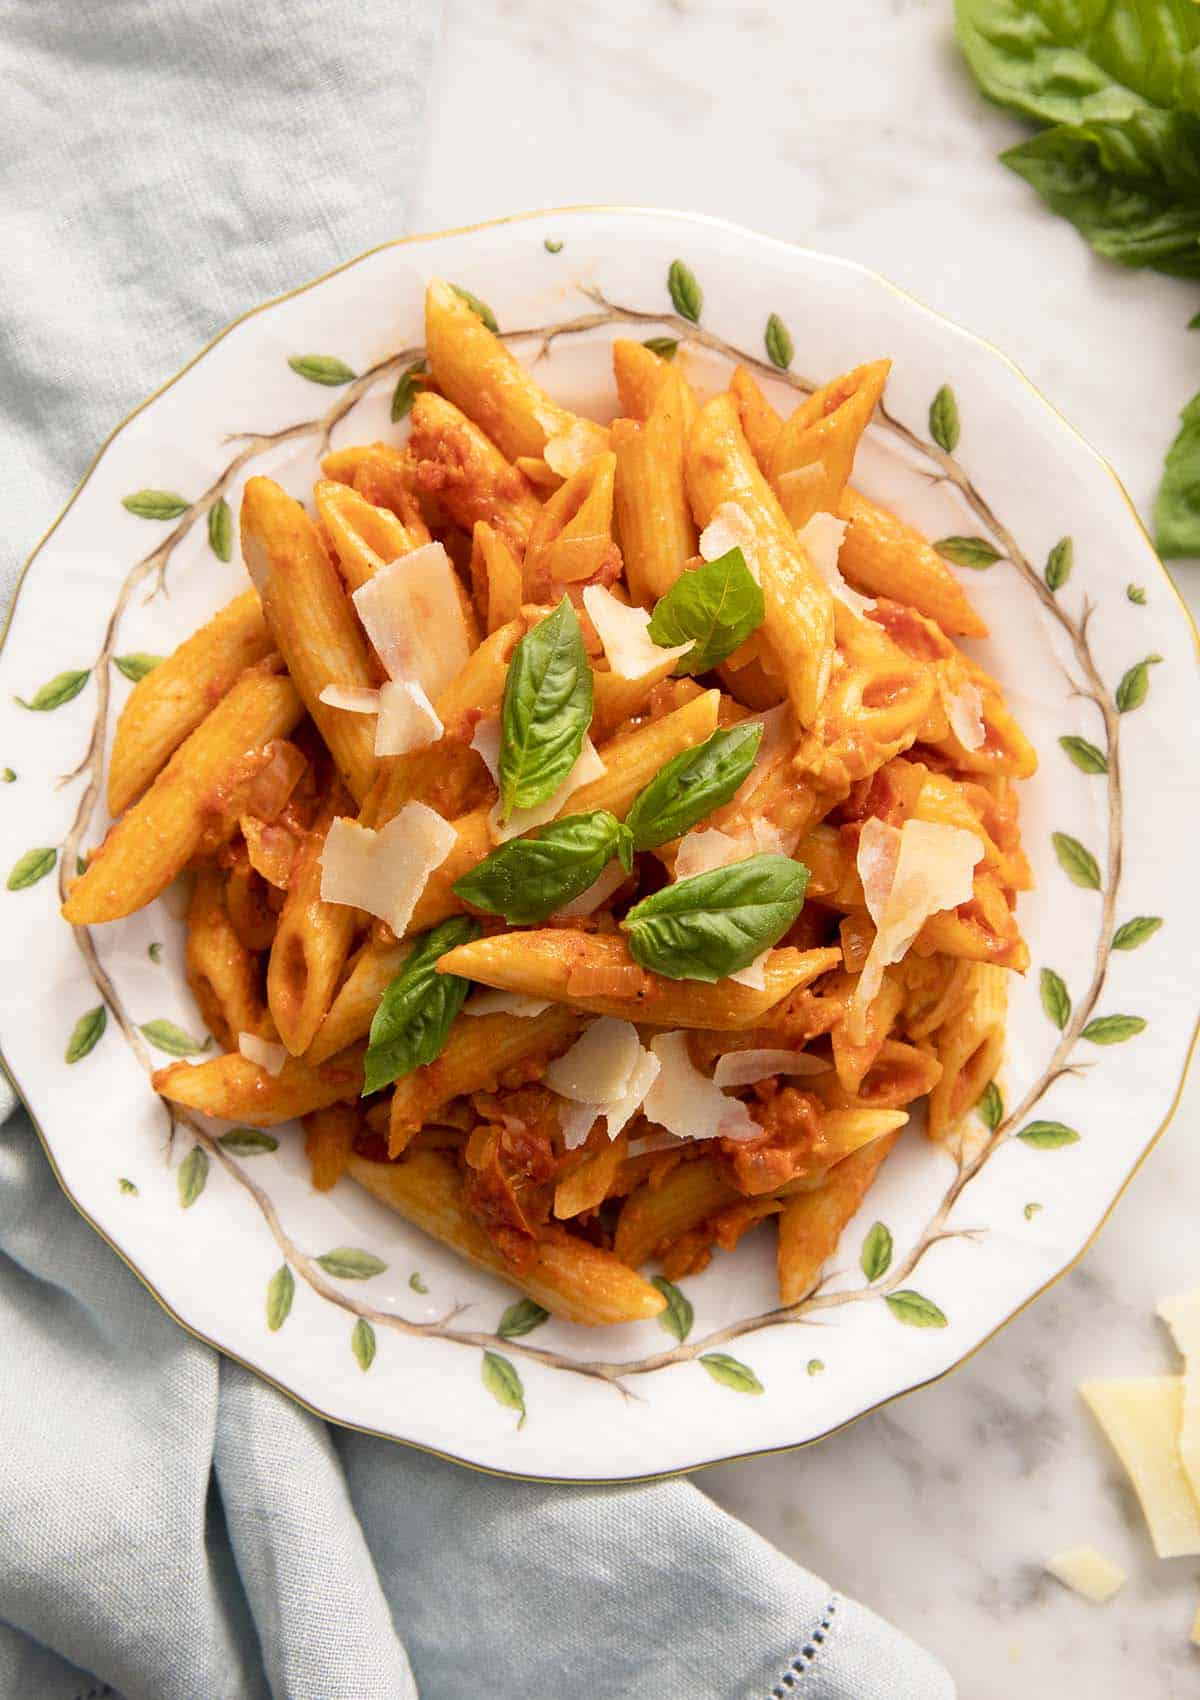 A portion of penne alla vodka on a plate.